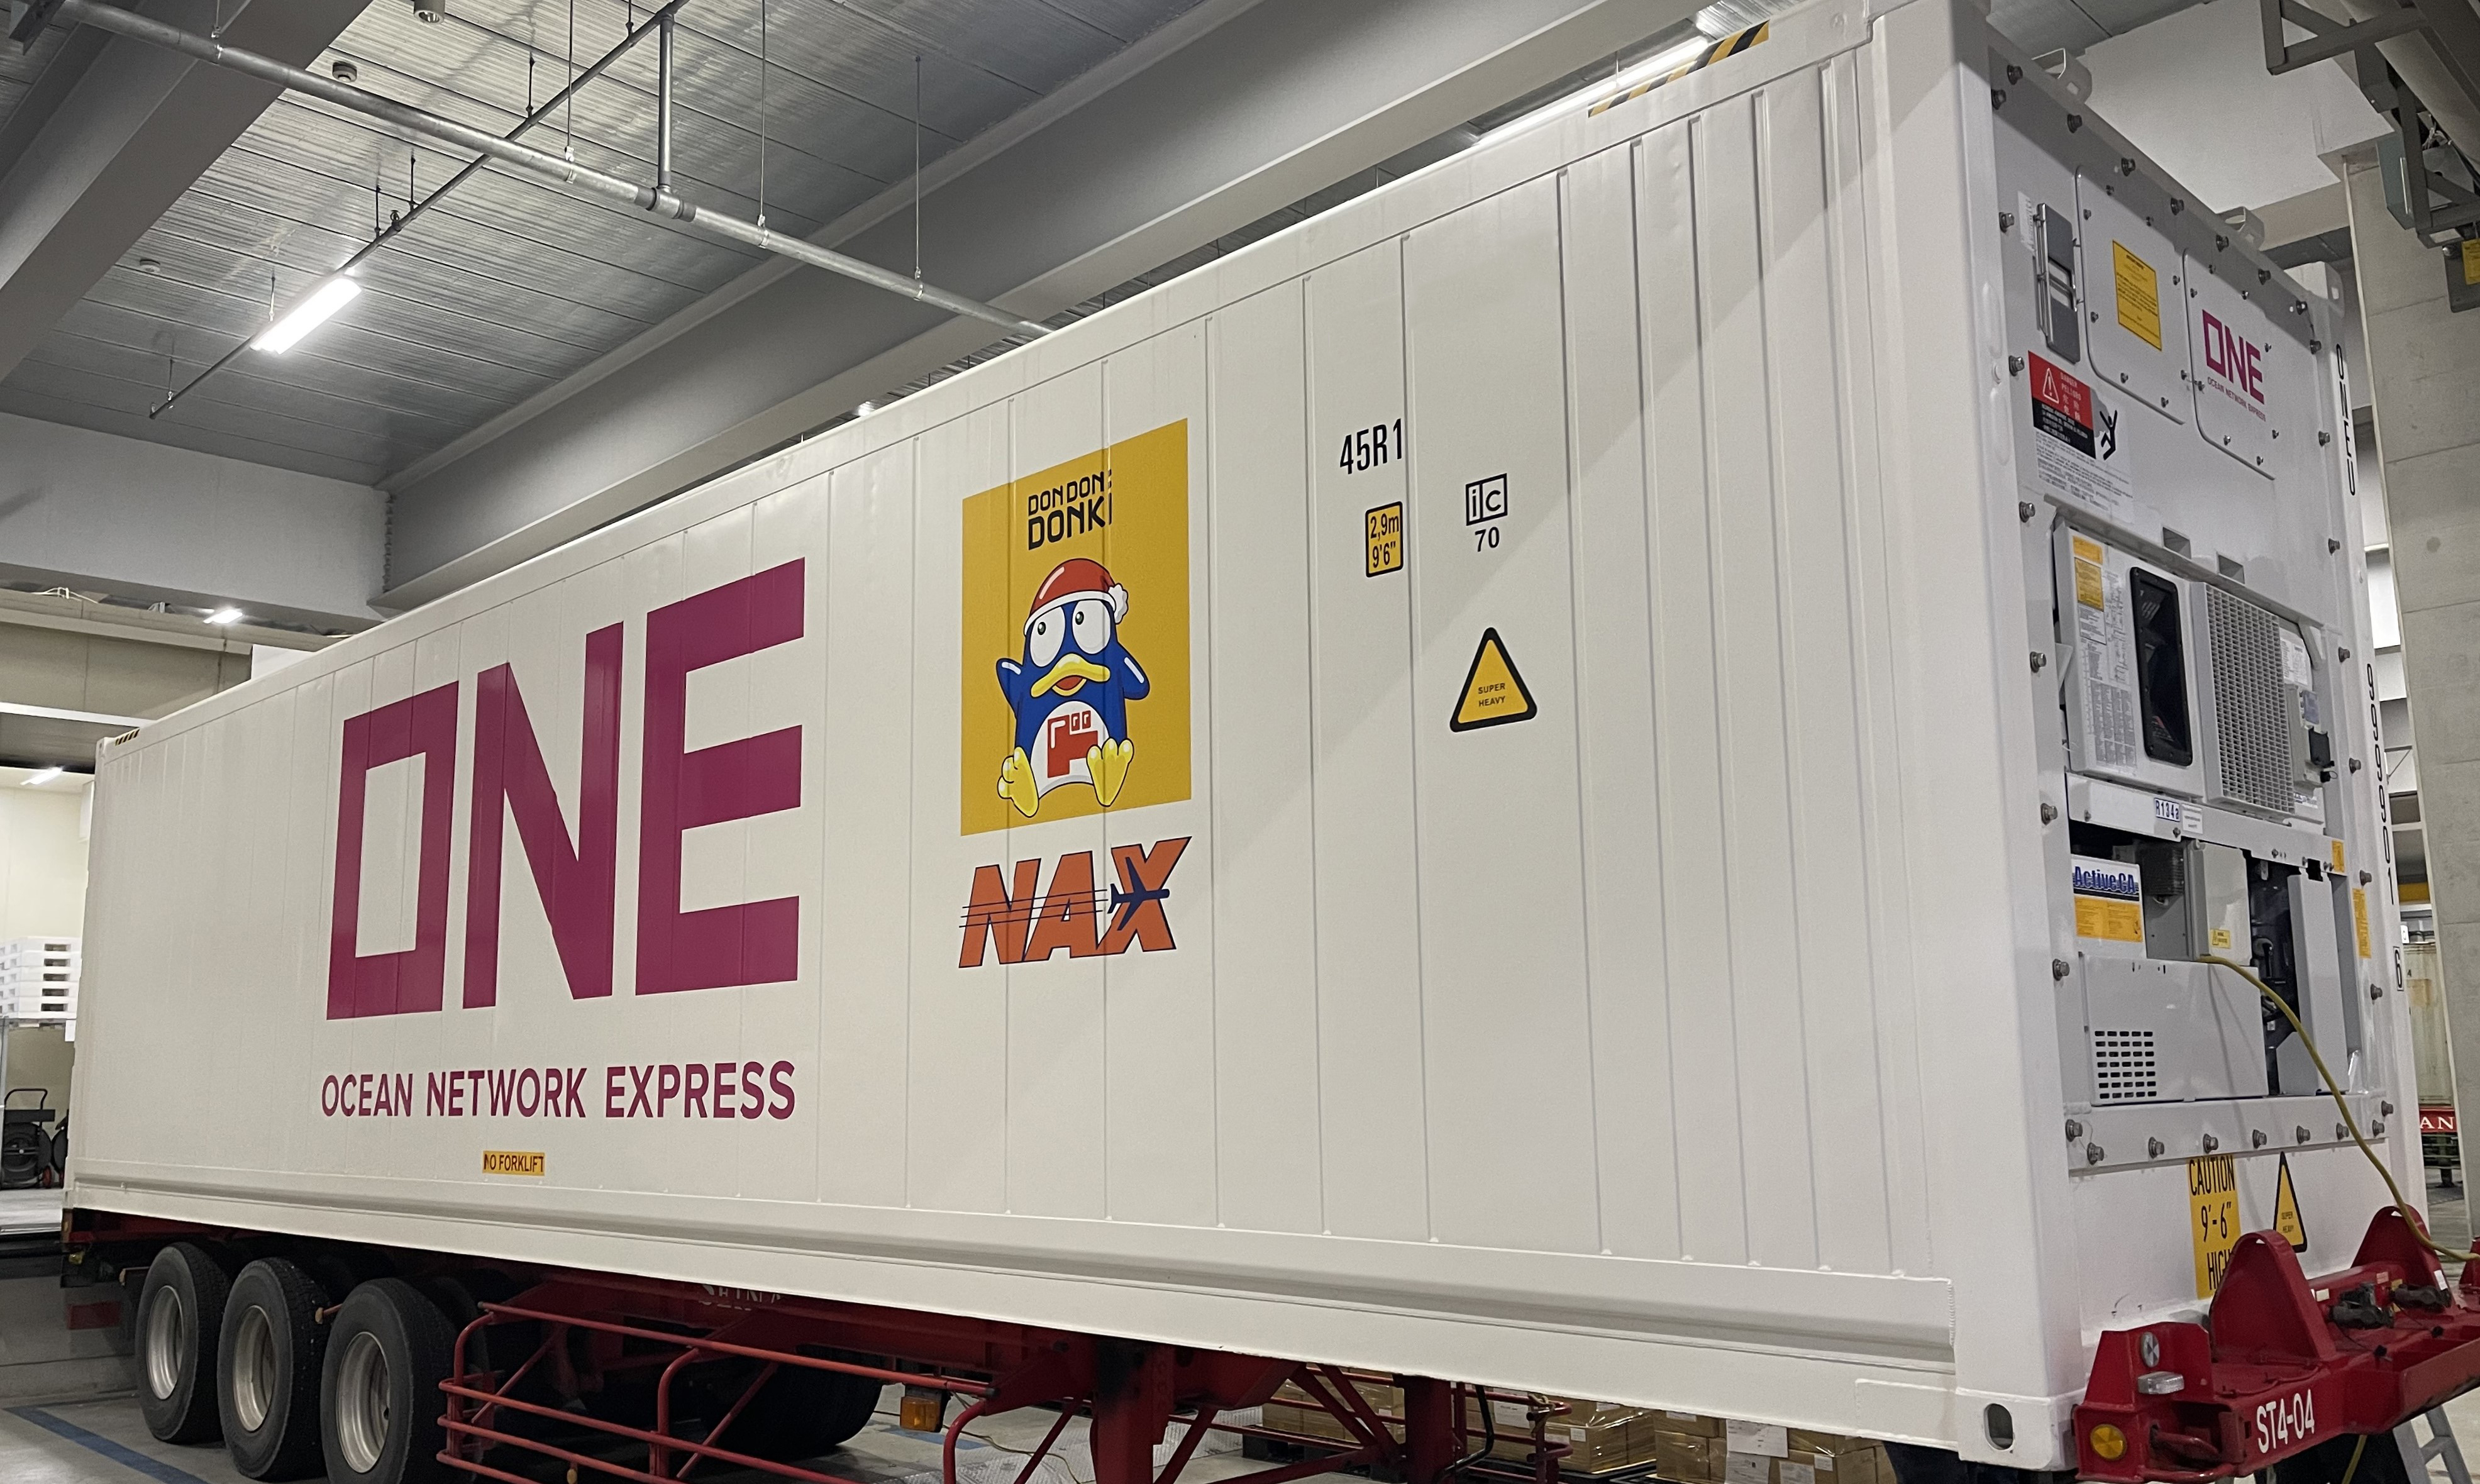 CA container labelled with “Donpen”, the official mascot of Don Quijote and the NAX logo